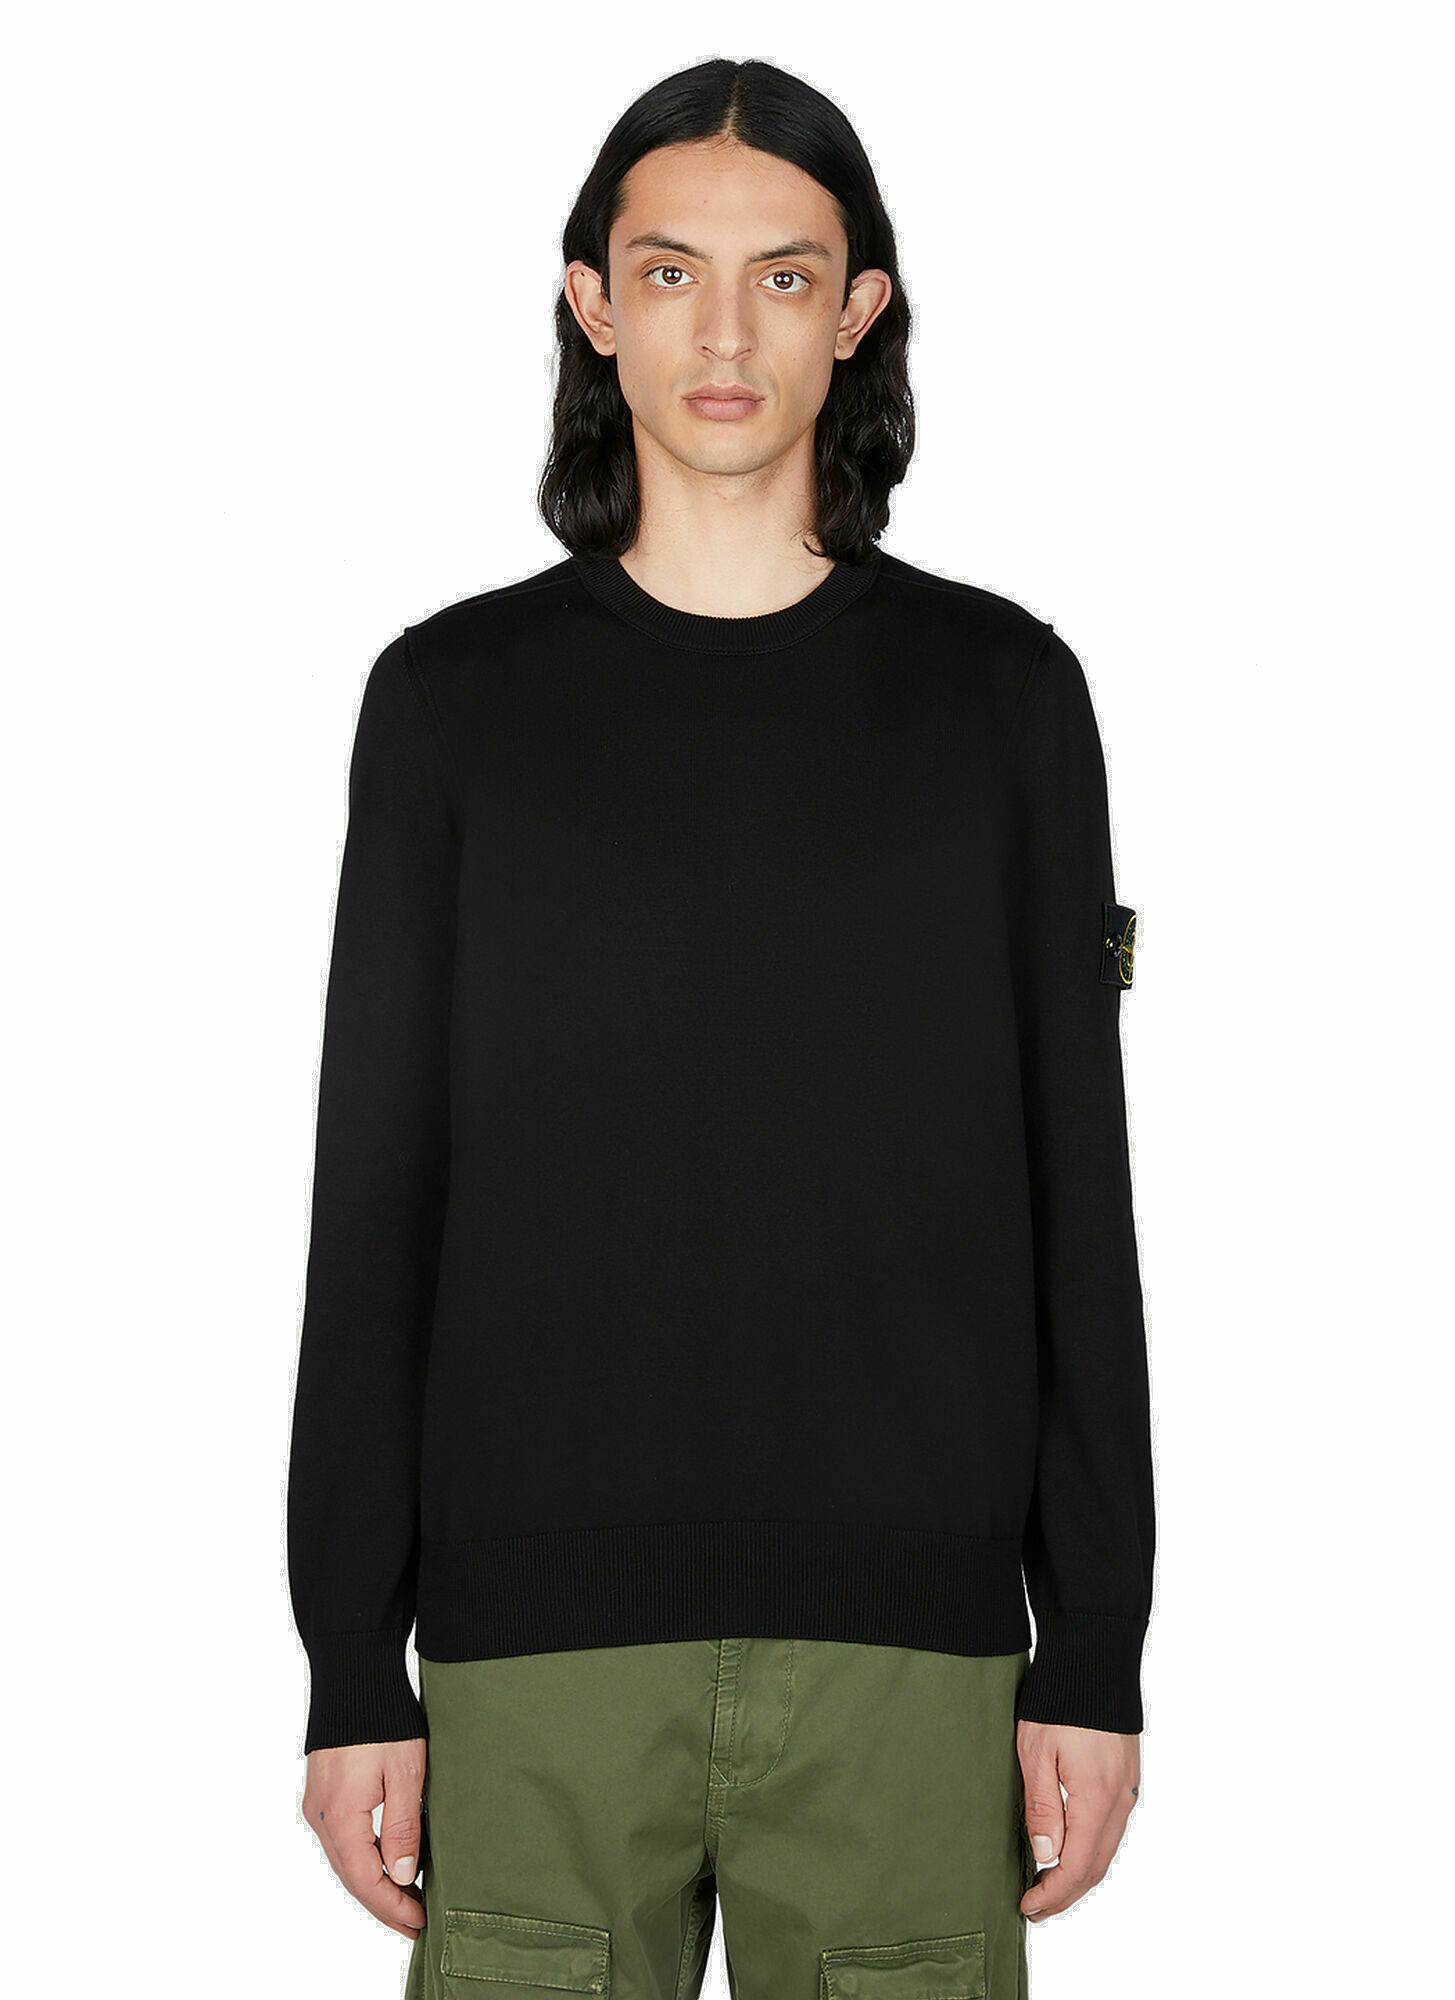 Photo: Stone Island - Compass Patch Sweater in Black